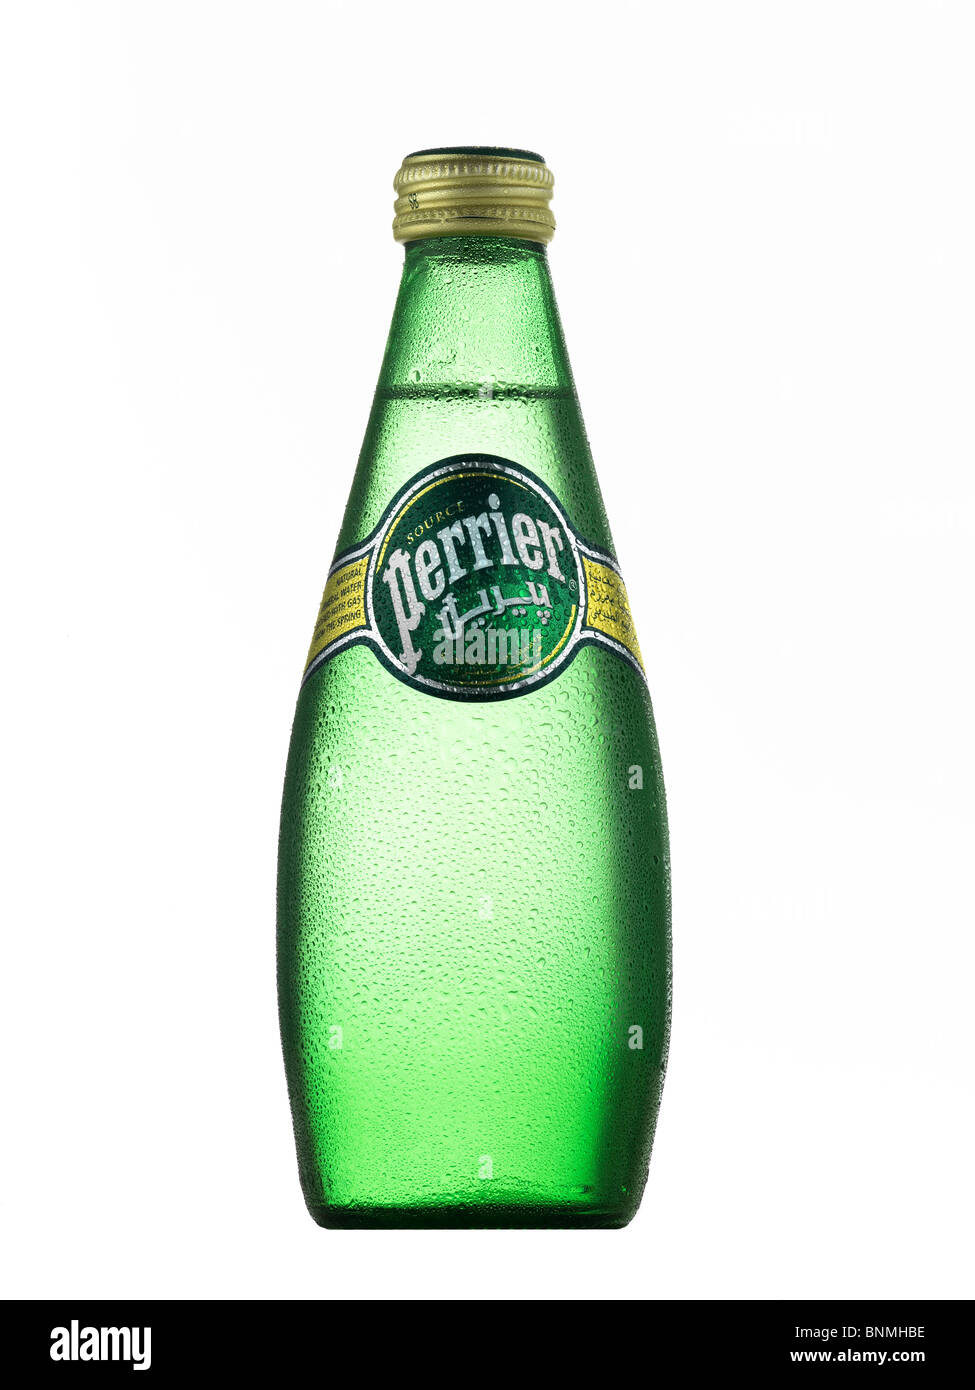 perrier bottle of water Stock Photo